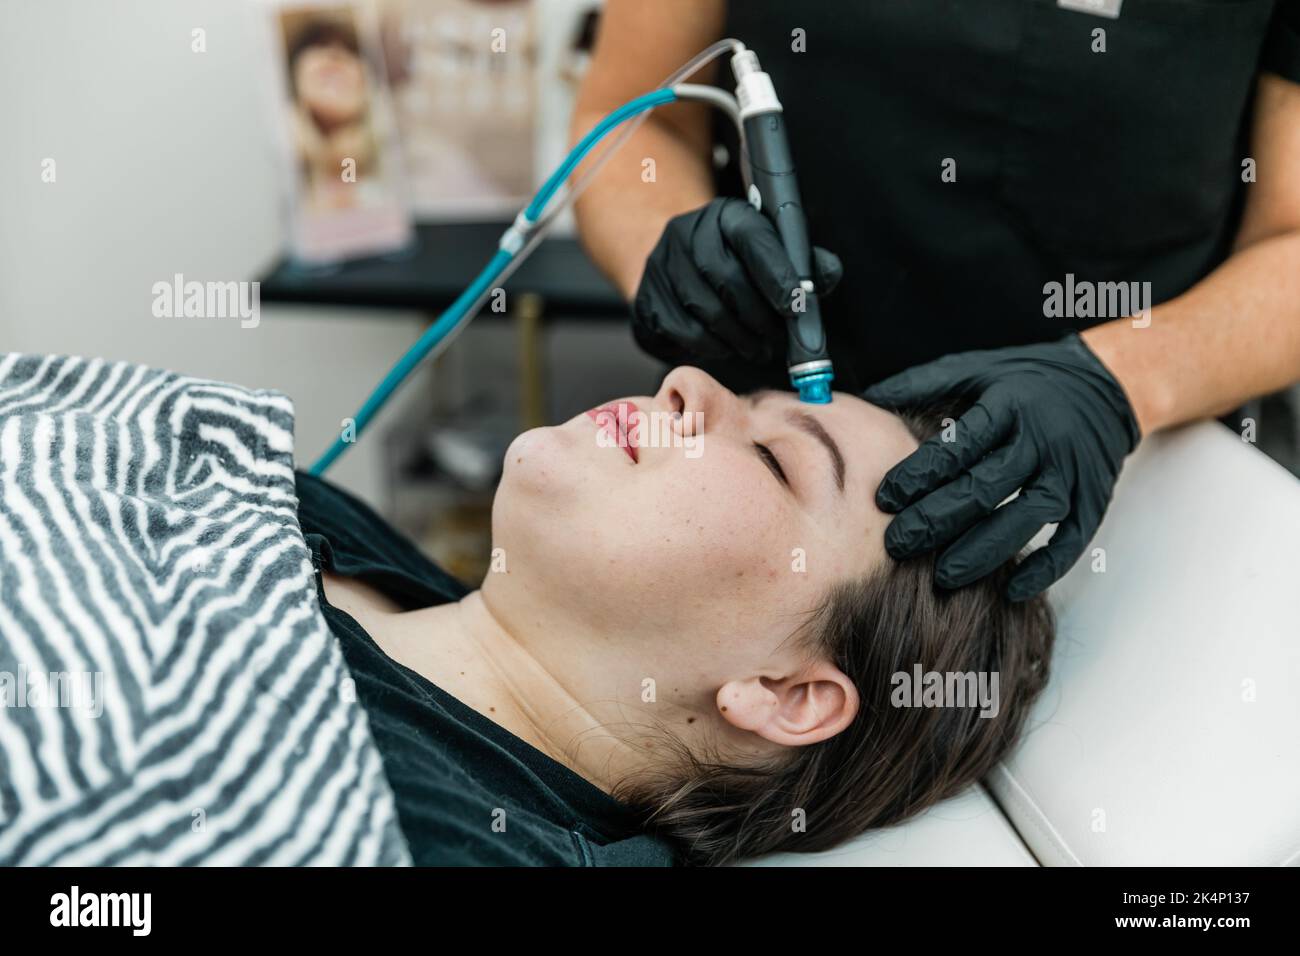 A healthcare provider giving a patient client a non-invasive resurfacing treatment facial for cleansing, extraction, exfoliating, and hydration Stock Photo